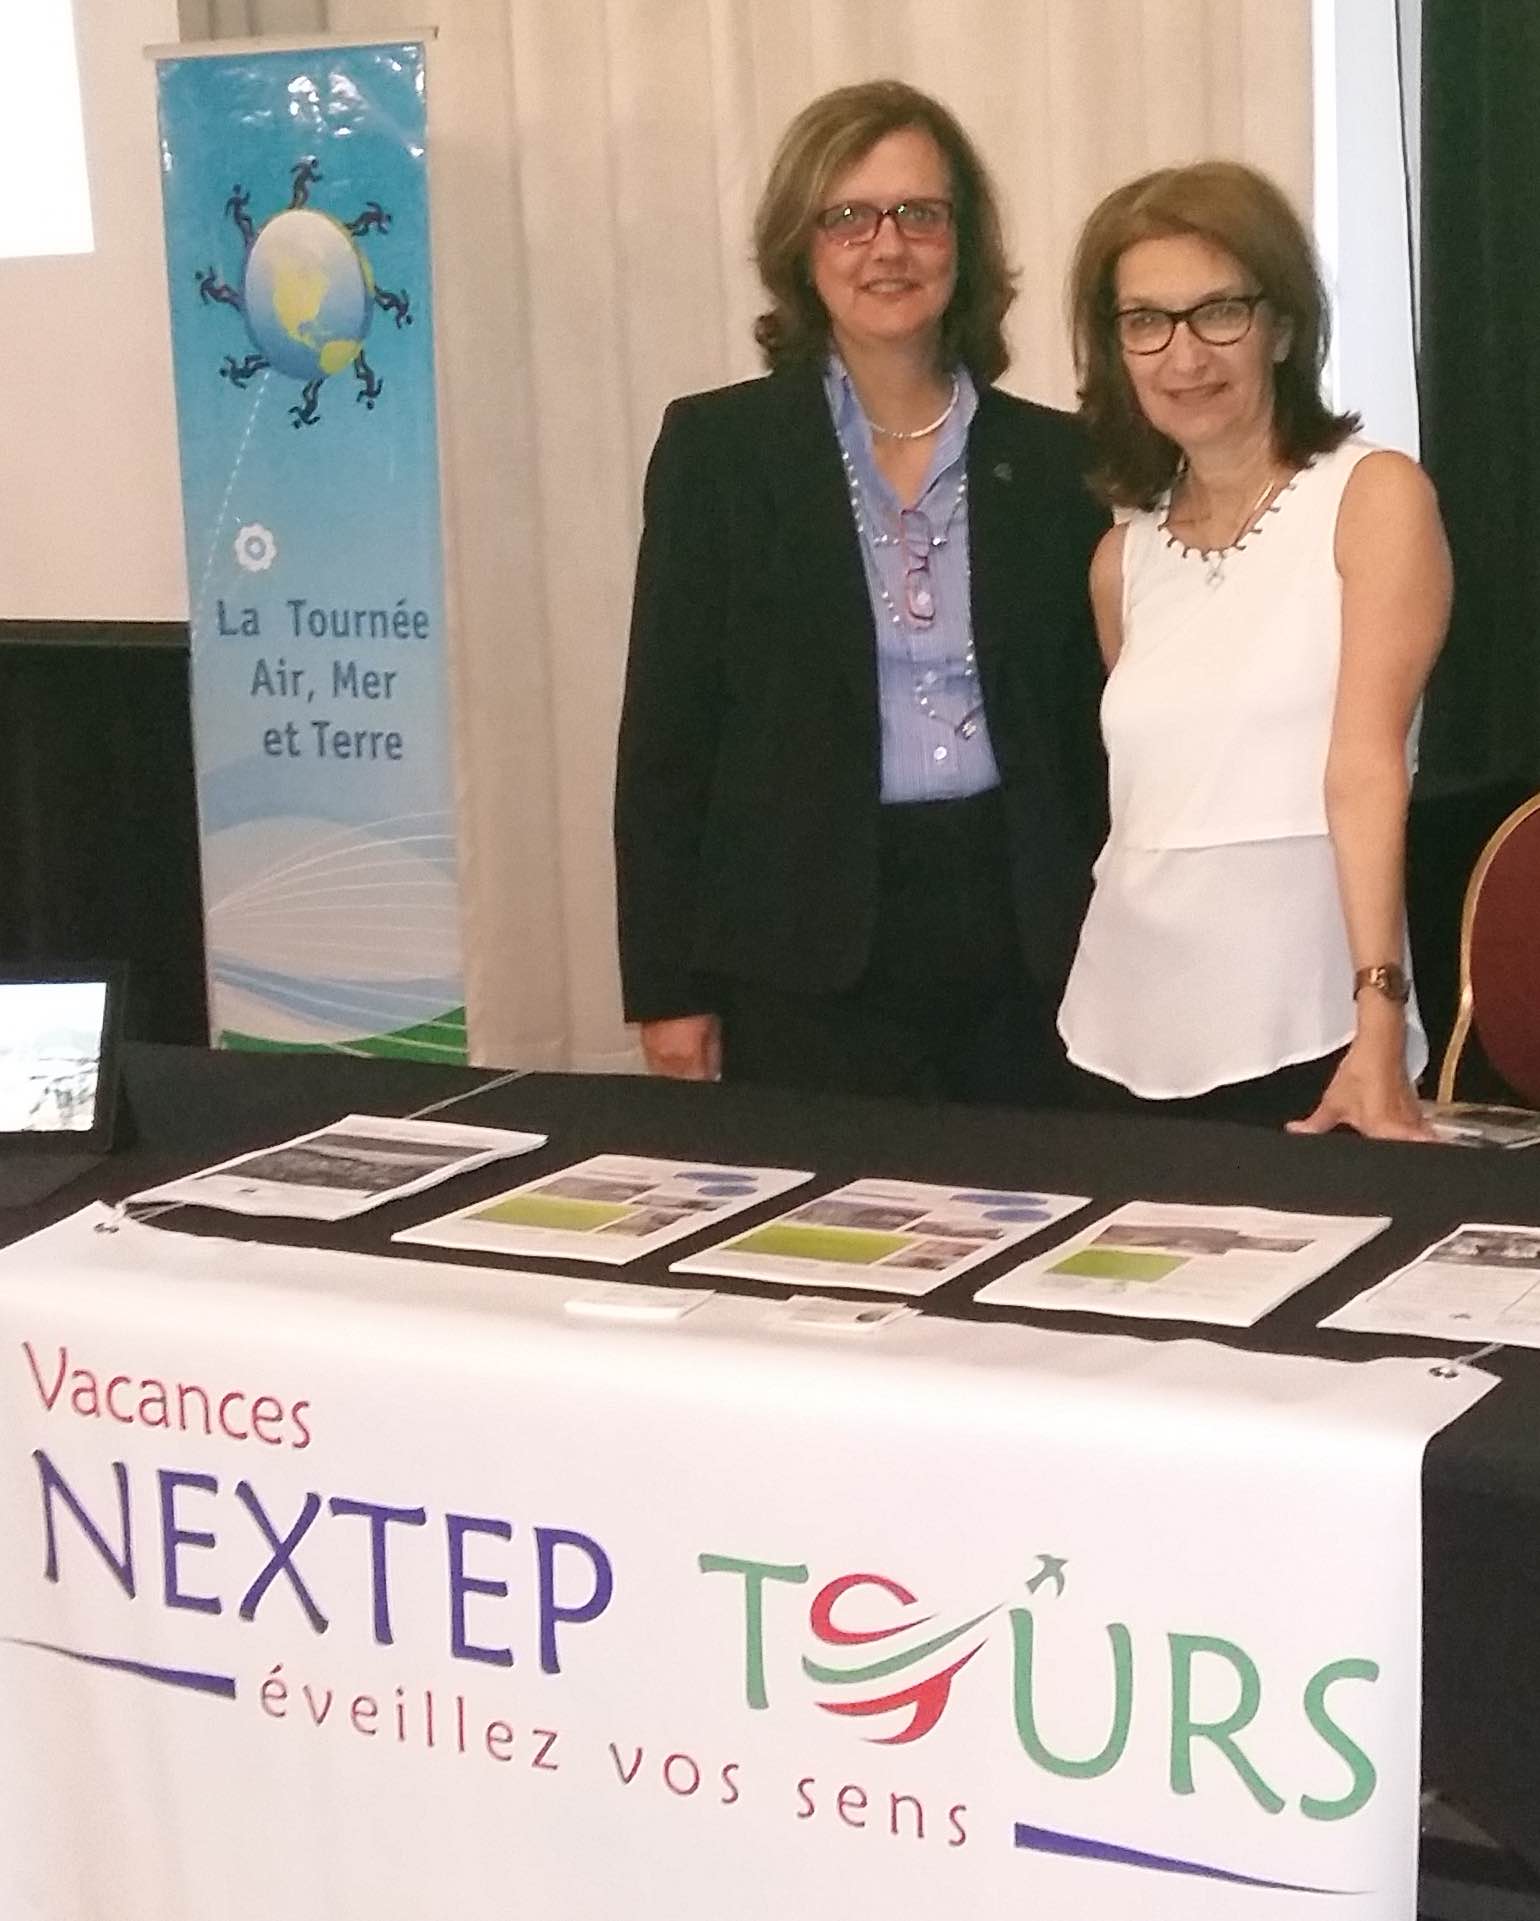 Tessie and Marie - Nextep Tours Founders